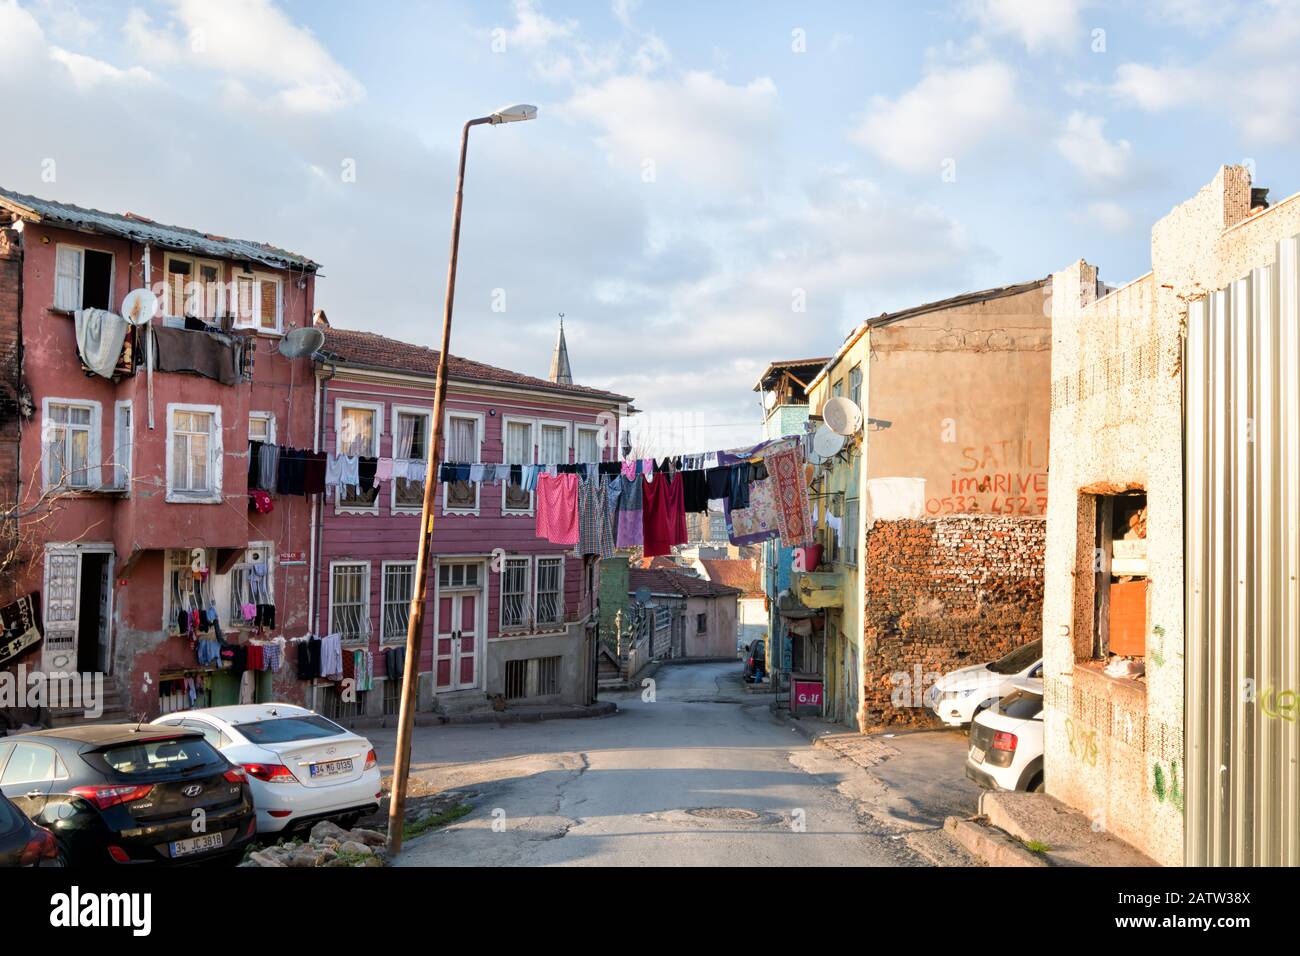 Istanbul, Turkey - January 15, 2020: laundry hanging out to dry at old traditional houses in historical Fatih area of Istanbul Stock Photo